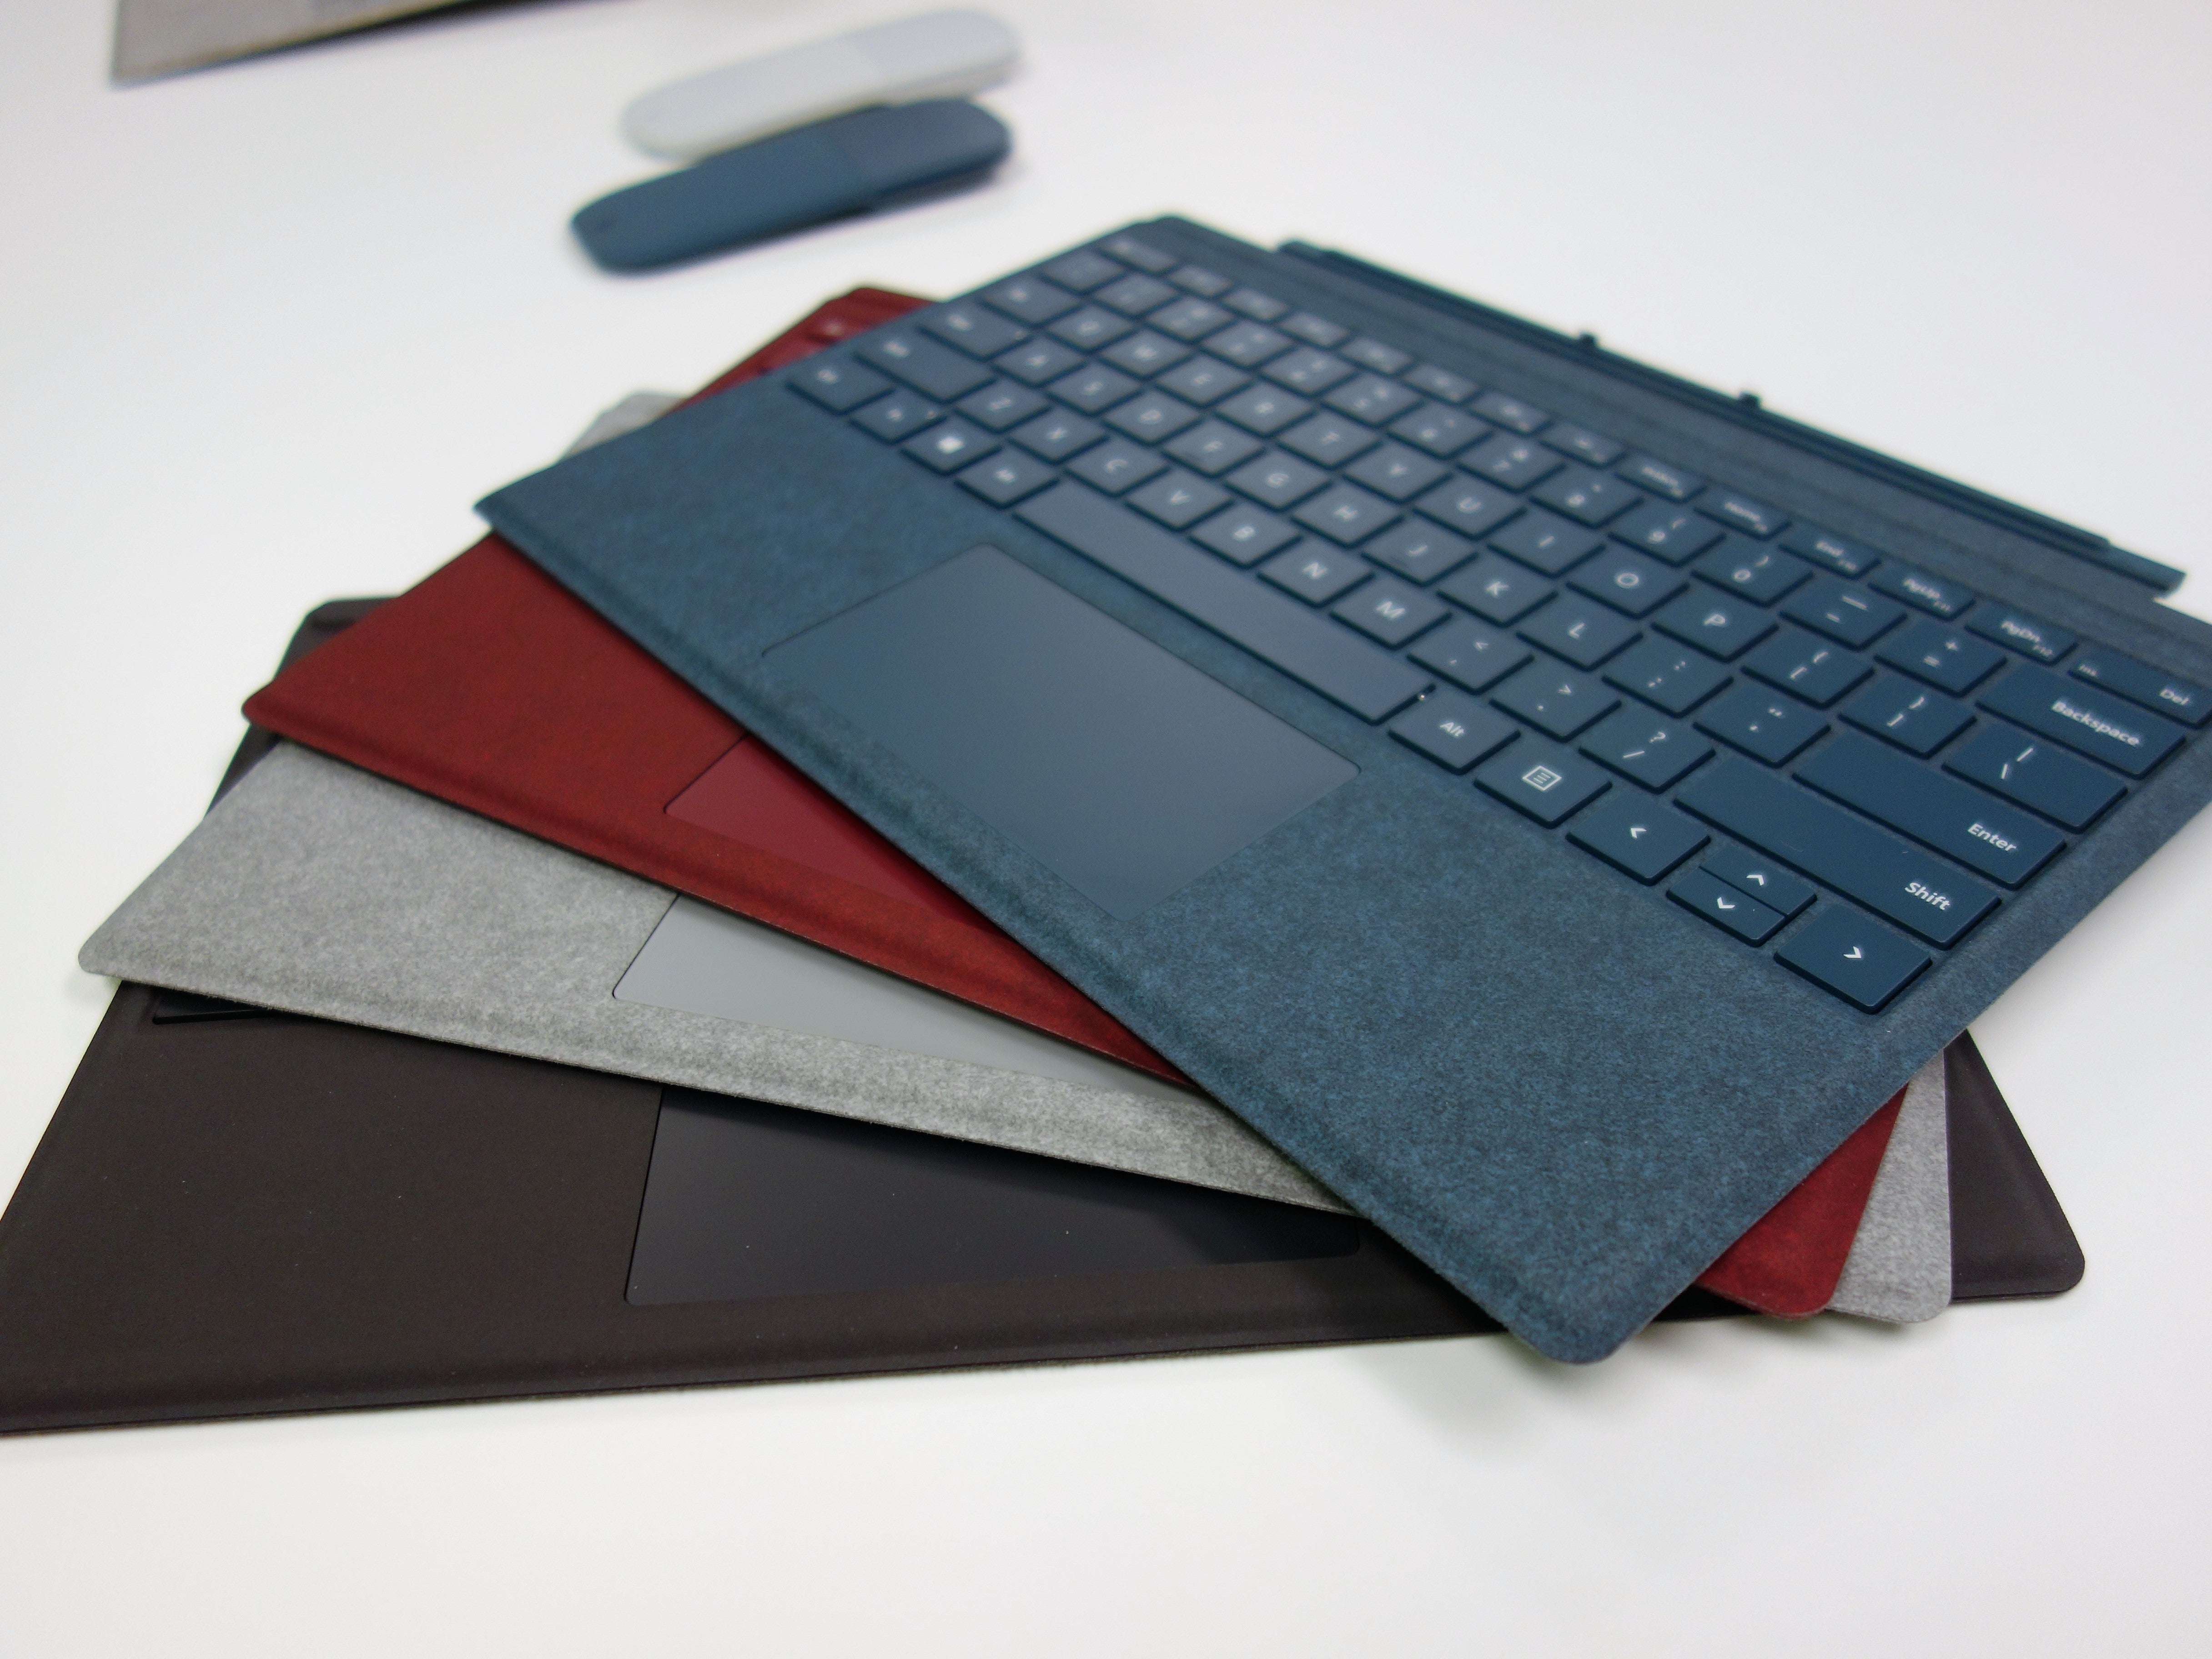 Microsoft Surface Pro: Pricing, release date, specs, features and